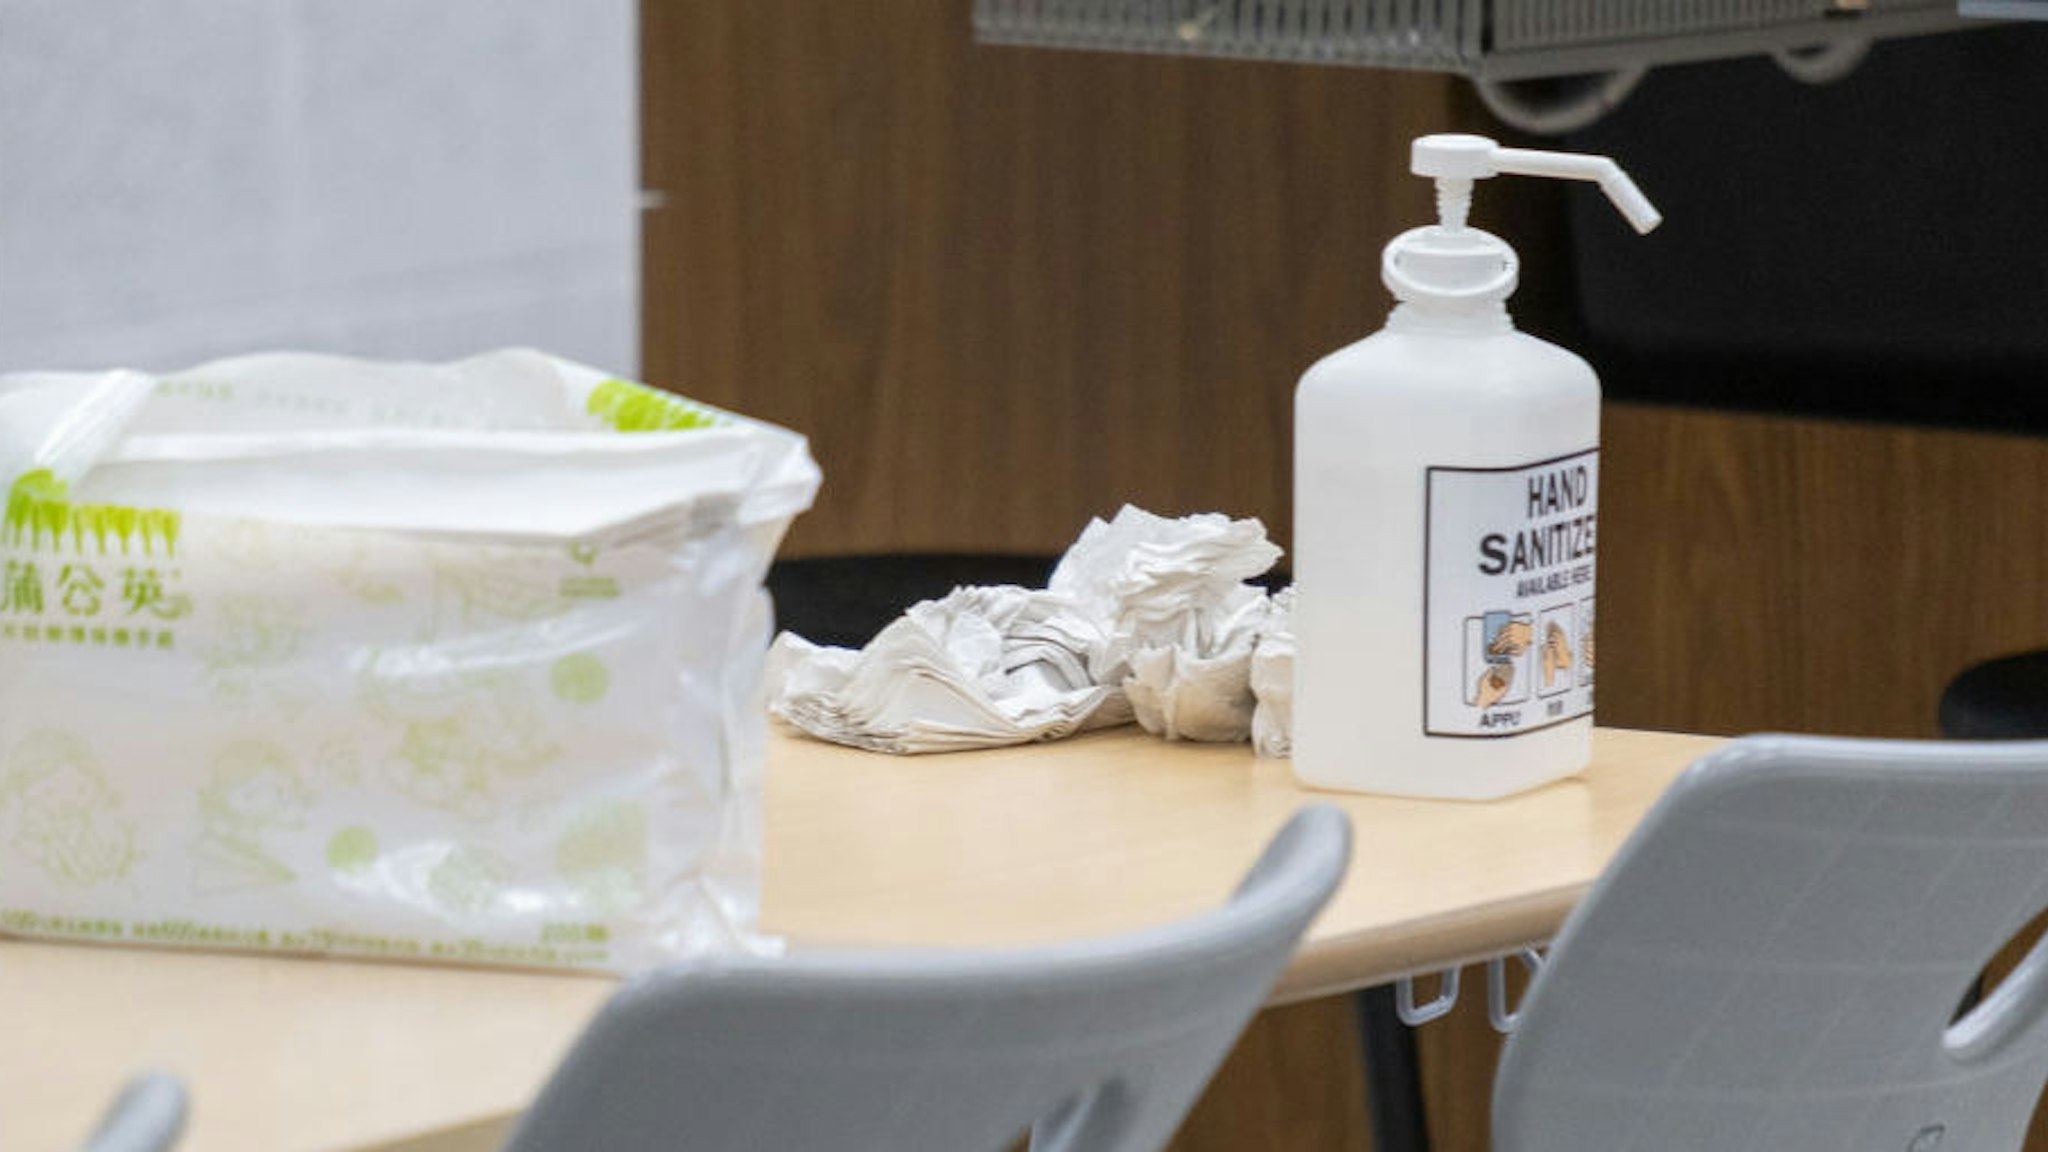 A view of a hand sanitizer and tissues on a desk of the school's chemistry lab. After the decision of the Taiwanese ministry of education to close the schools until February 25, 2020 with the aim of preventing and fighting against the Coronavirus, the American school of Taipei, set up a system of digital learning to enable students to continue their education. TAS is one of the most prestigious private schools in Taiwan. (Photo by Walid Berrazeg/SOPA Images/LightRocket via Getty Images)